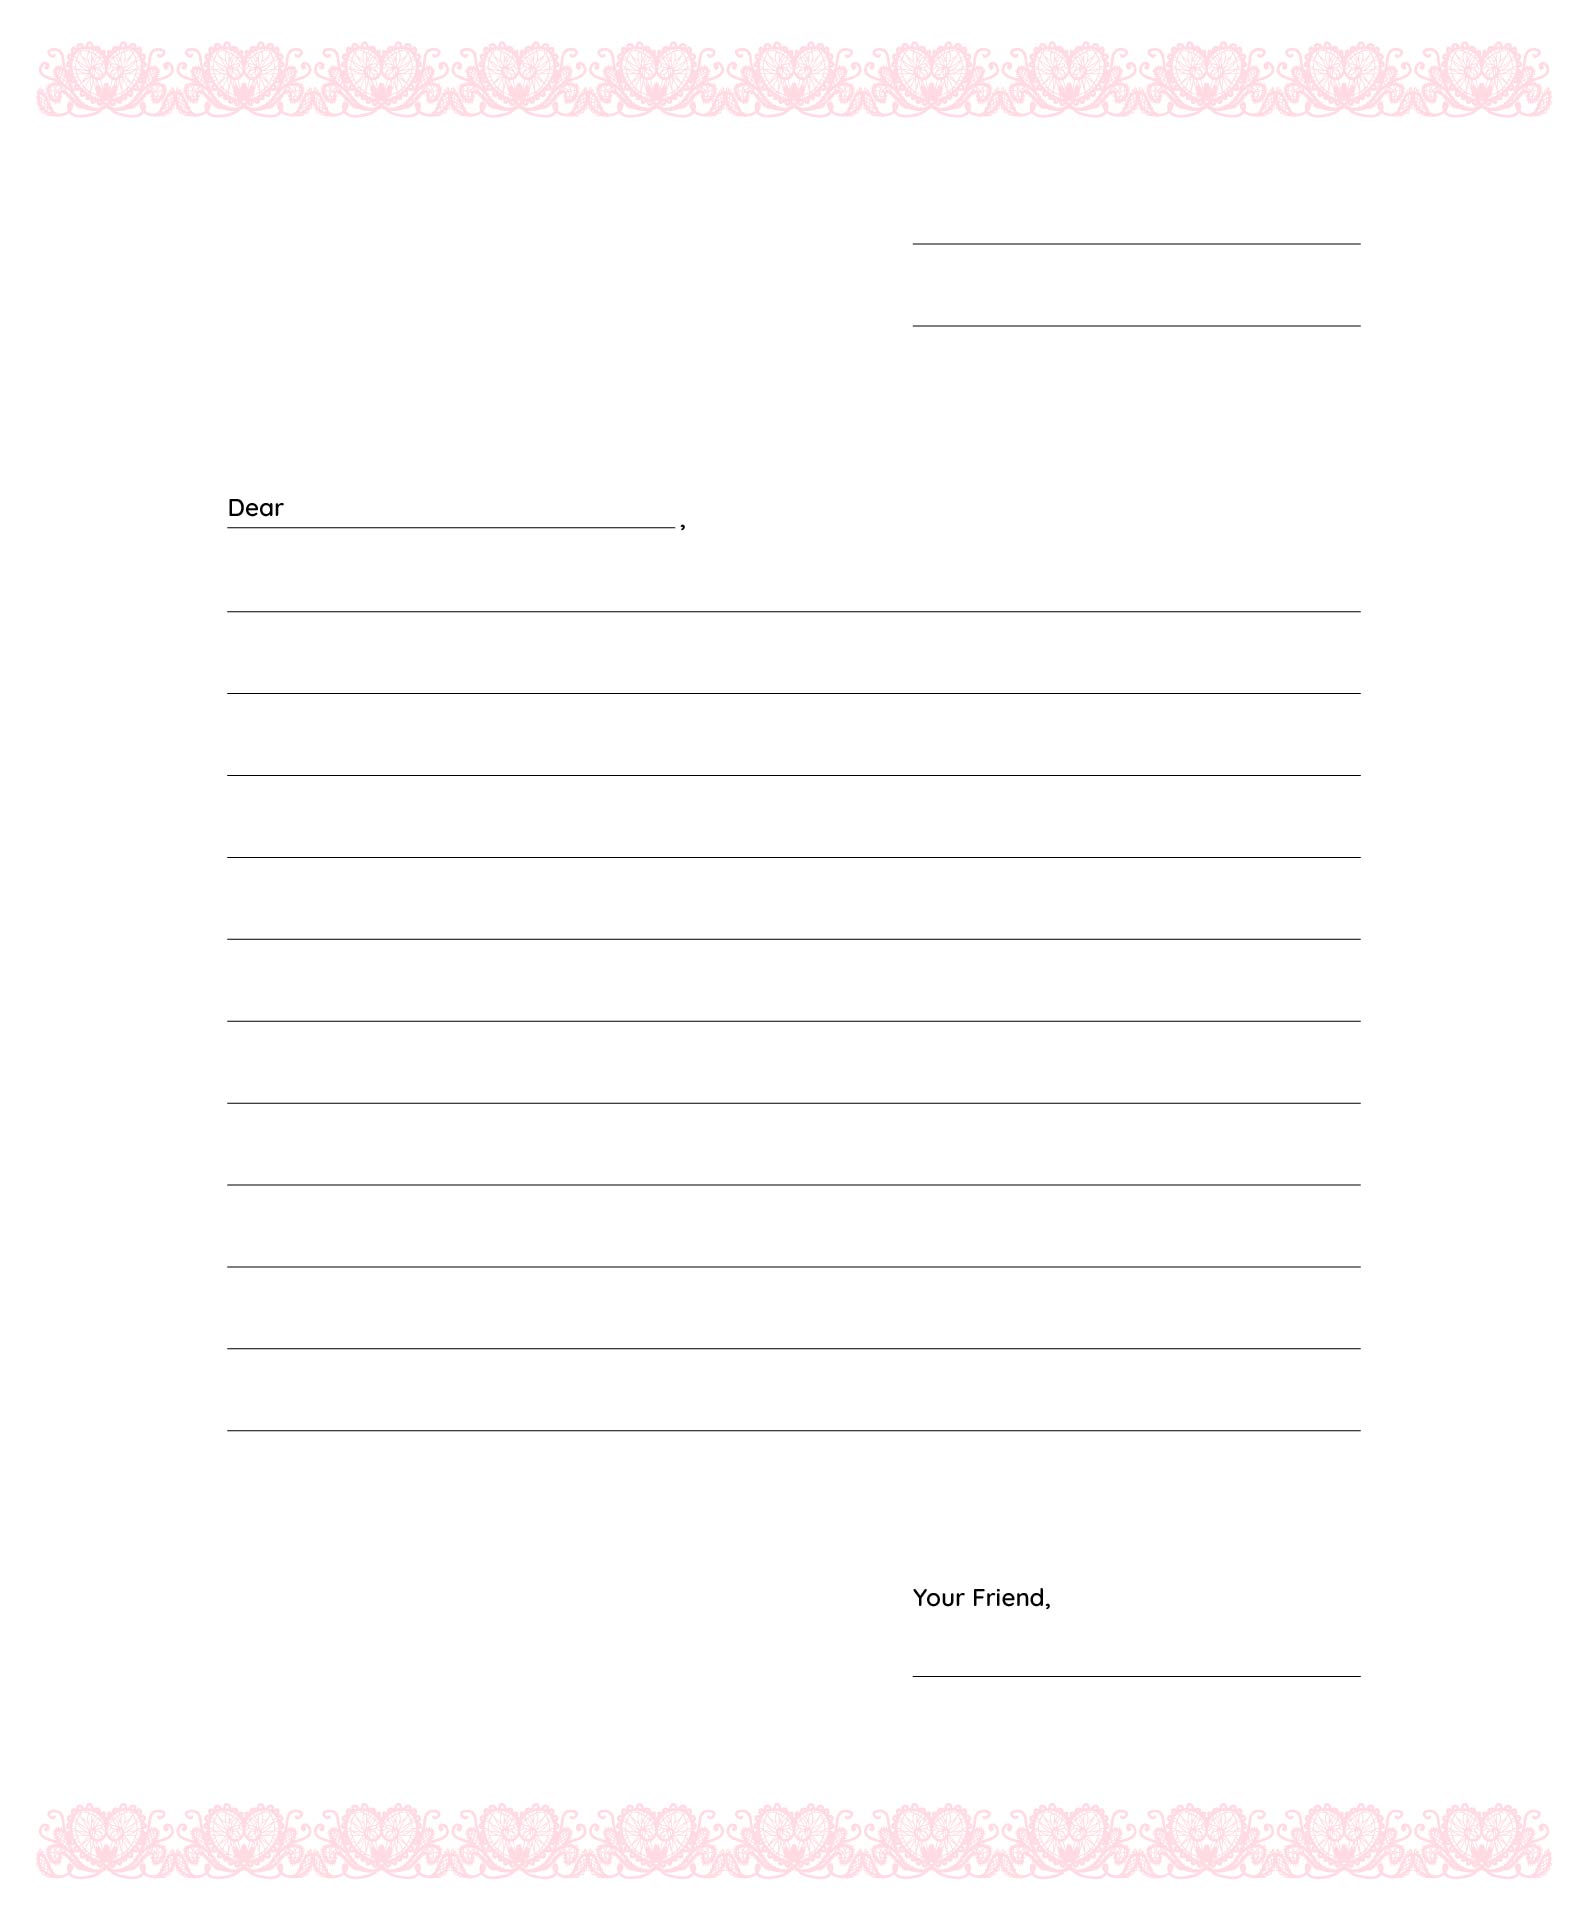 Printable Letter Forms - Printable Forms Free Online